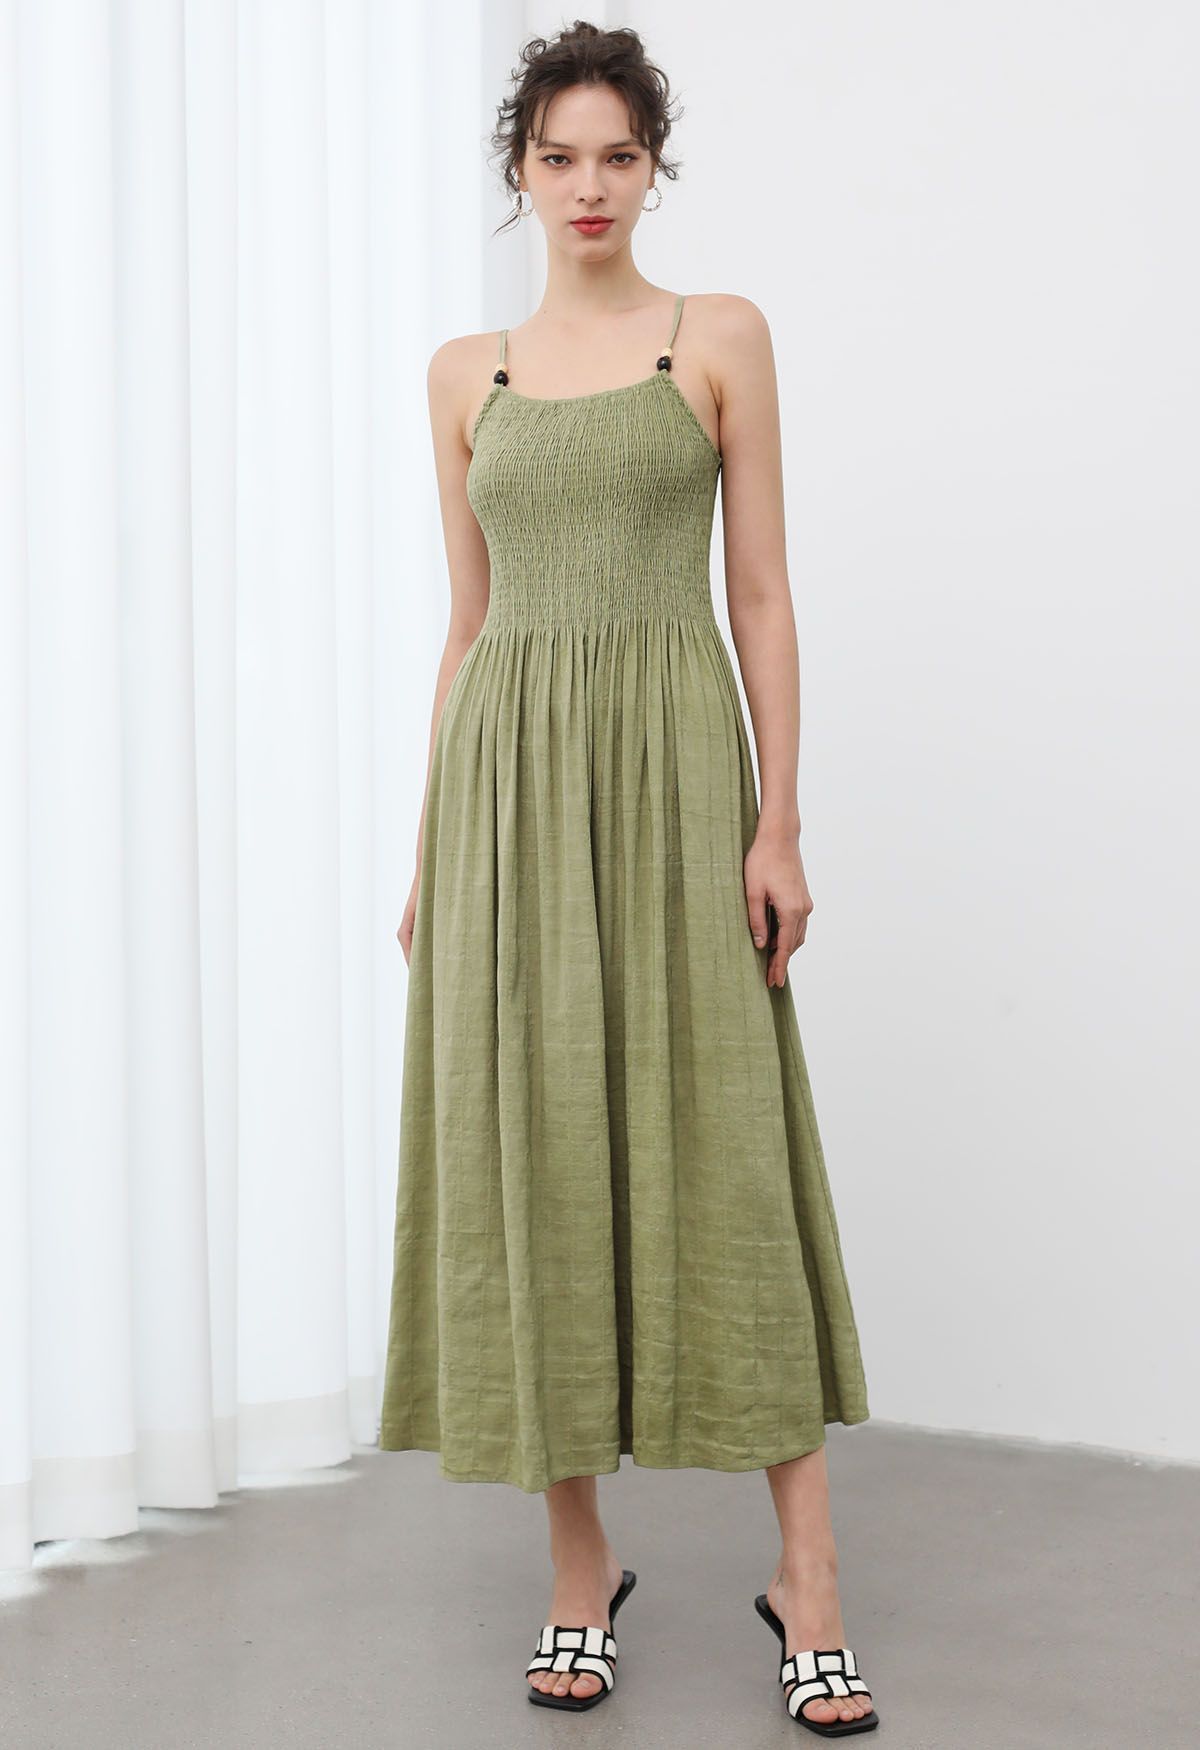 Beaded Strap Shirred Bodice Cami Dress in Pea Green | Chicwish